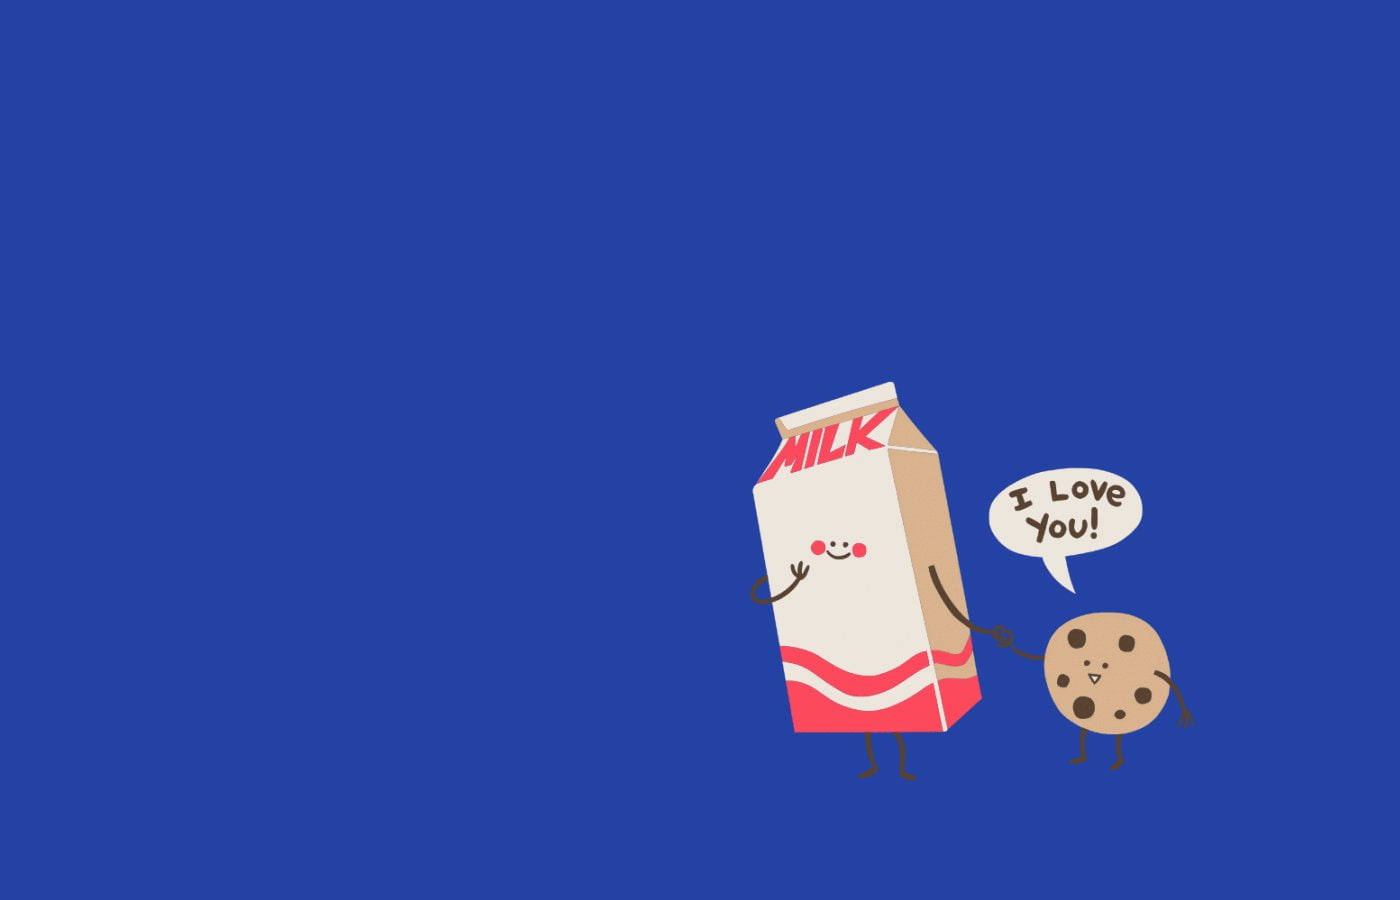 white and red milk tetra pack illustration, Humor, Other, Cookie